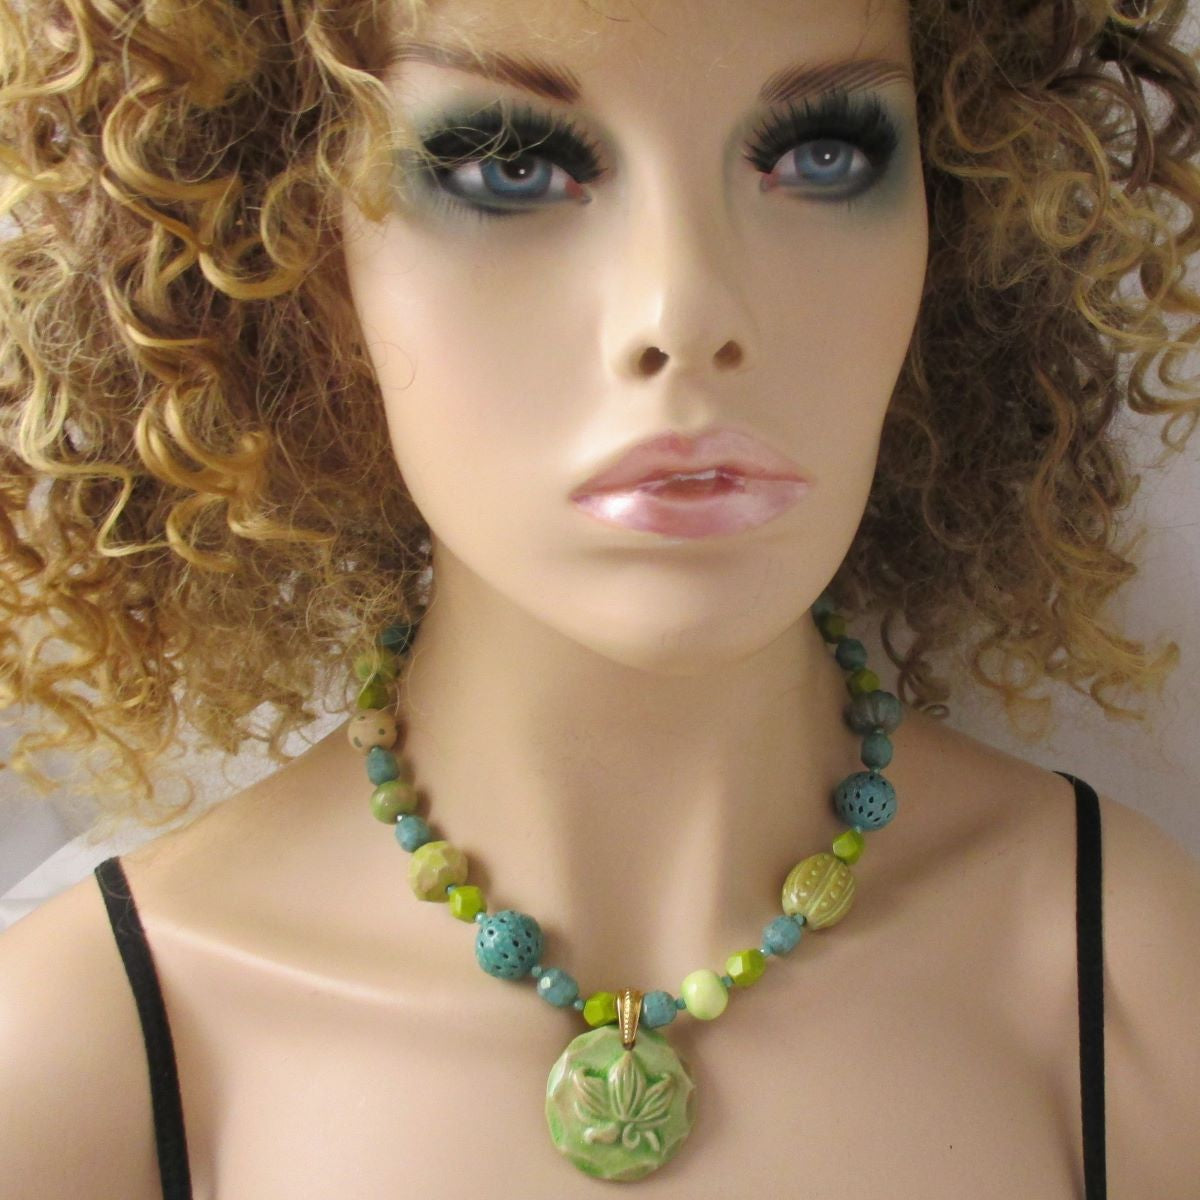 Ceramic Pendant Necklace in Celery and Teal Handmade Ceramic Beads - VP's Jewelry 